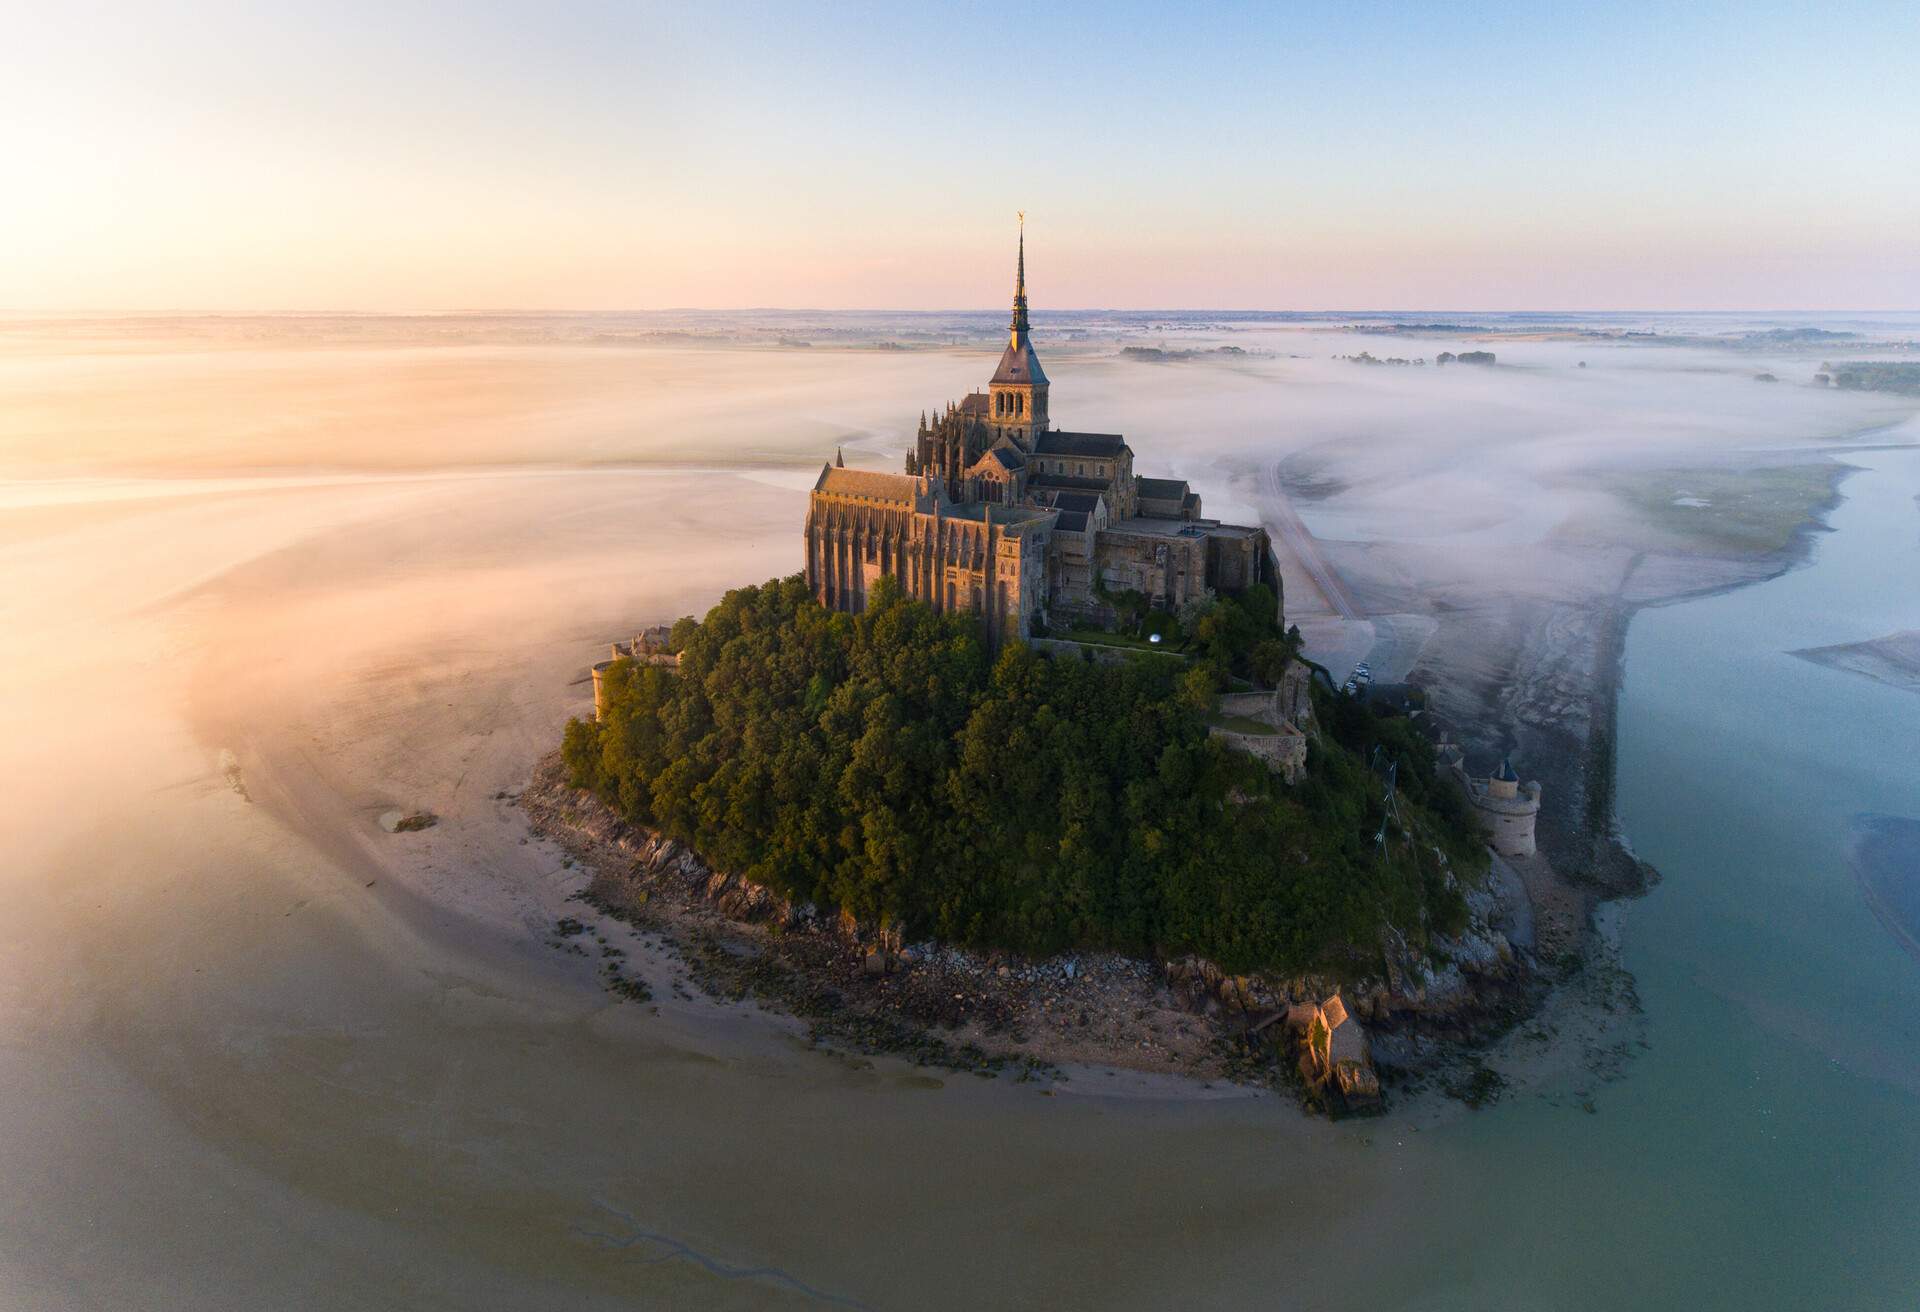 This image is taken in the Mont Saint-Michel during a pink sunrise with a little fog.